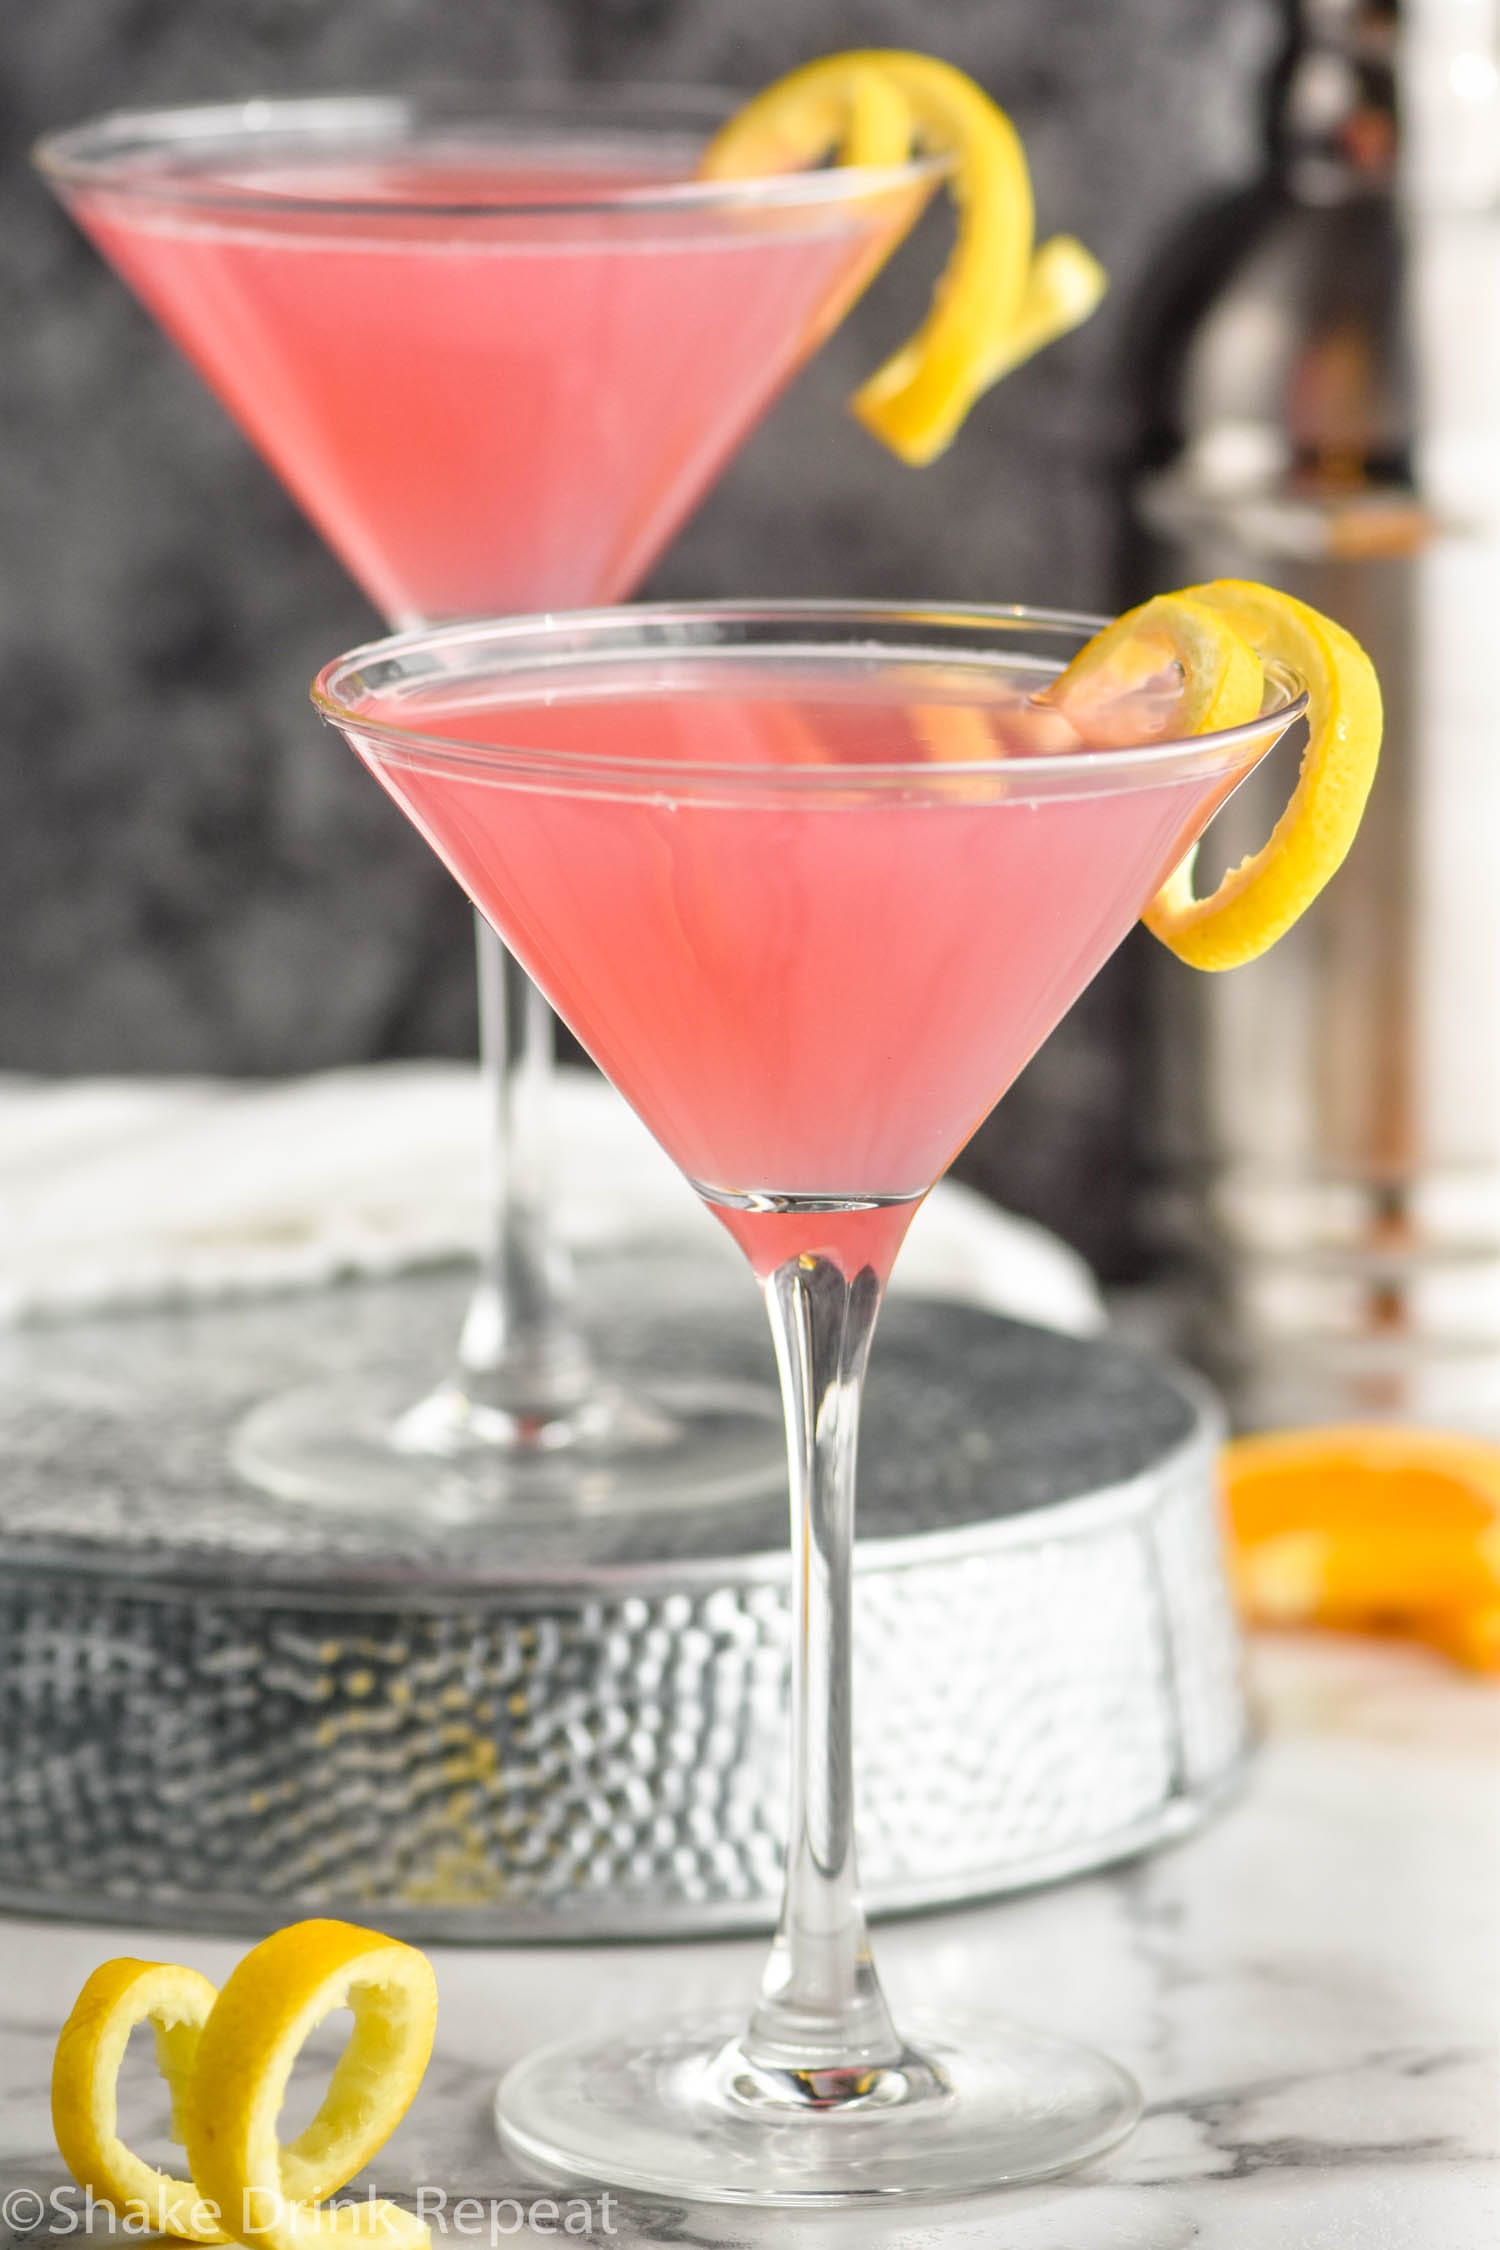 Two Cosmopolitan Cocktail's in a glass garnished with a lemon twist